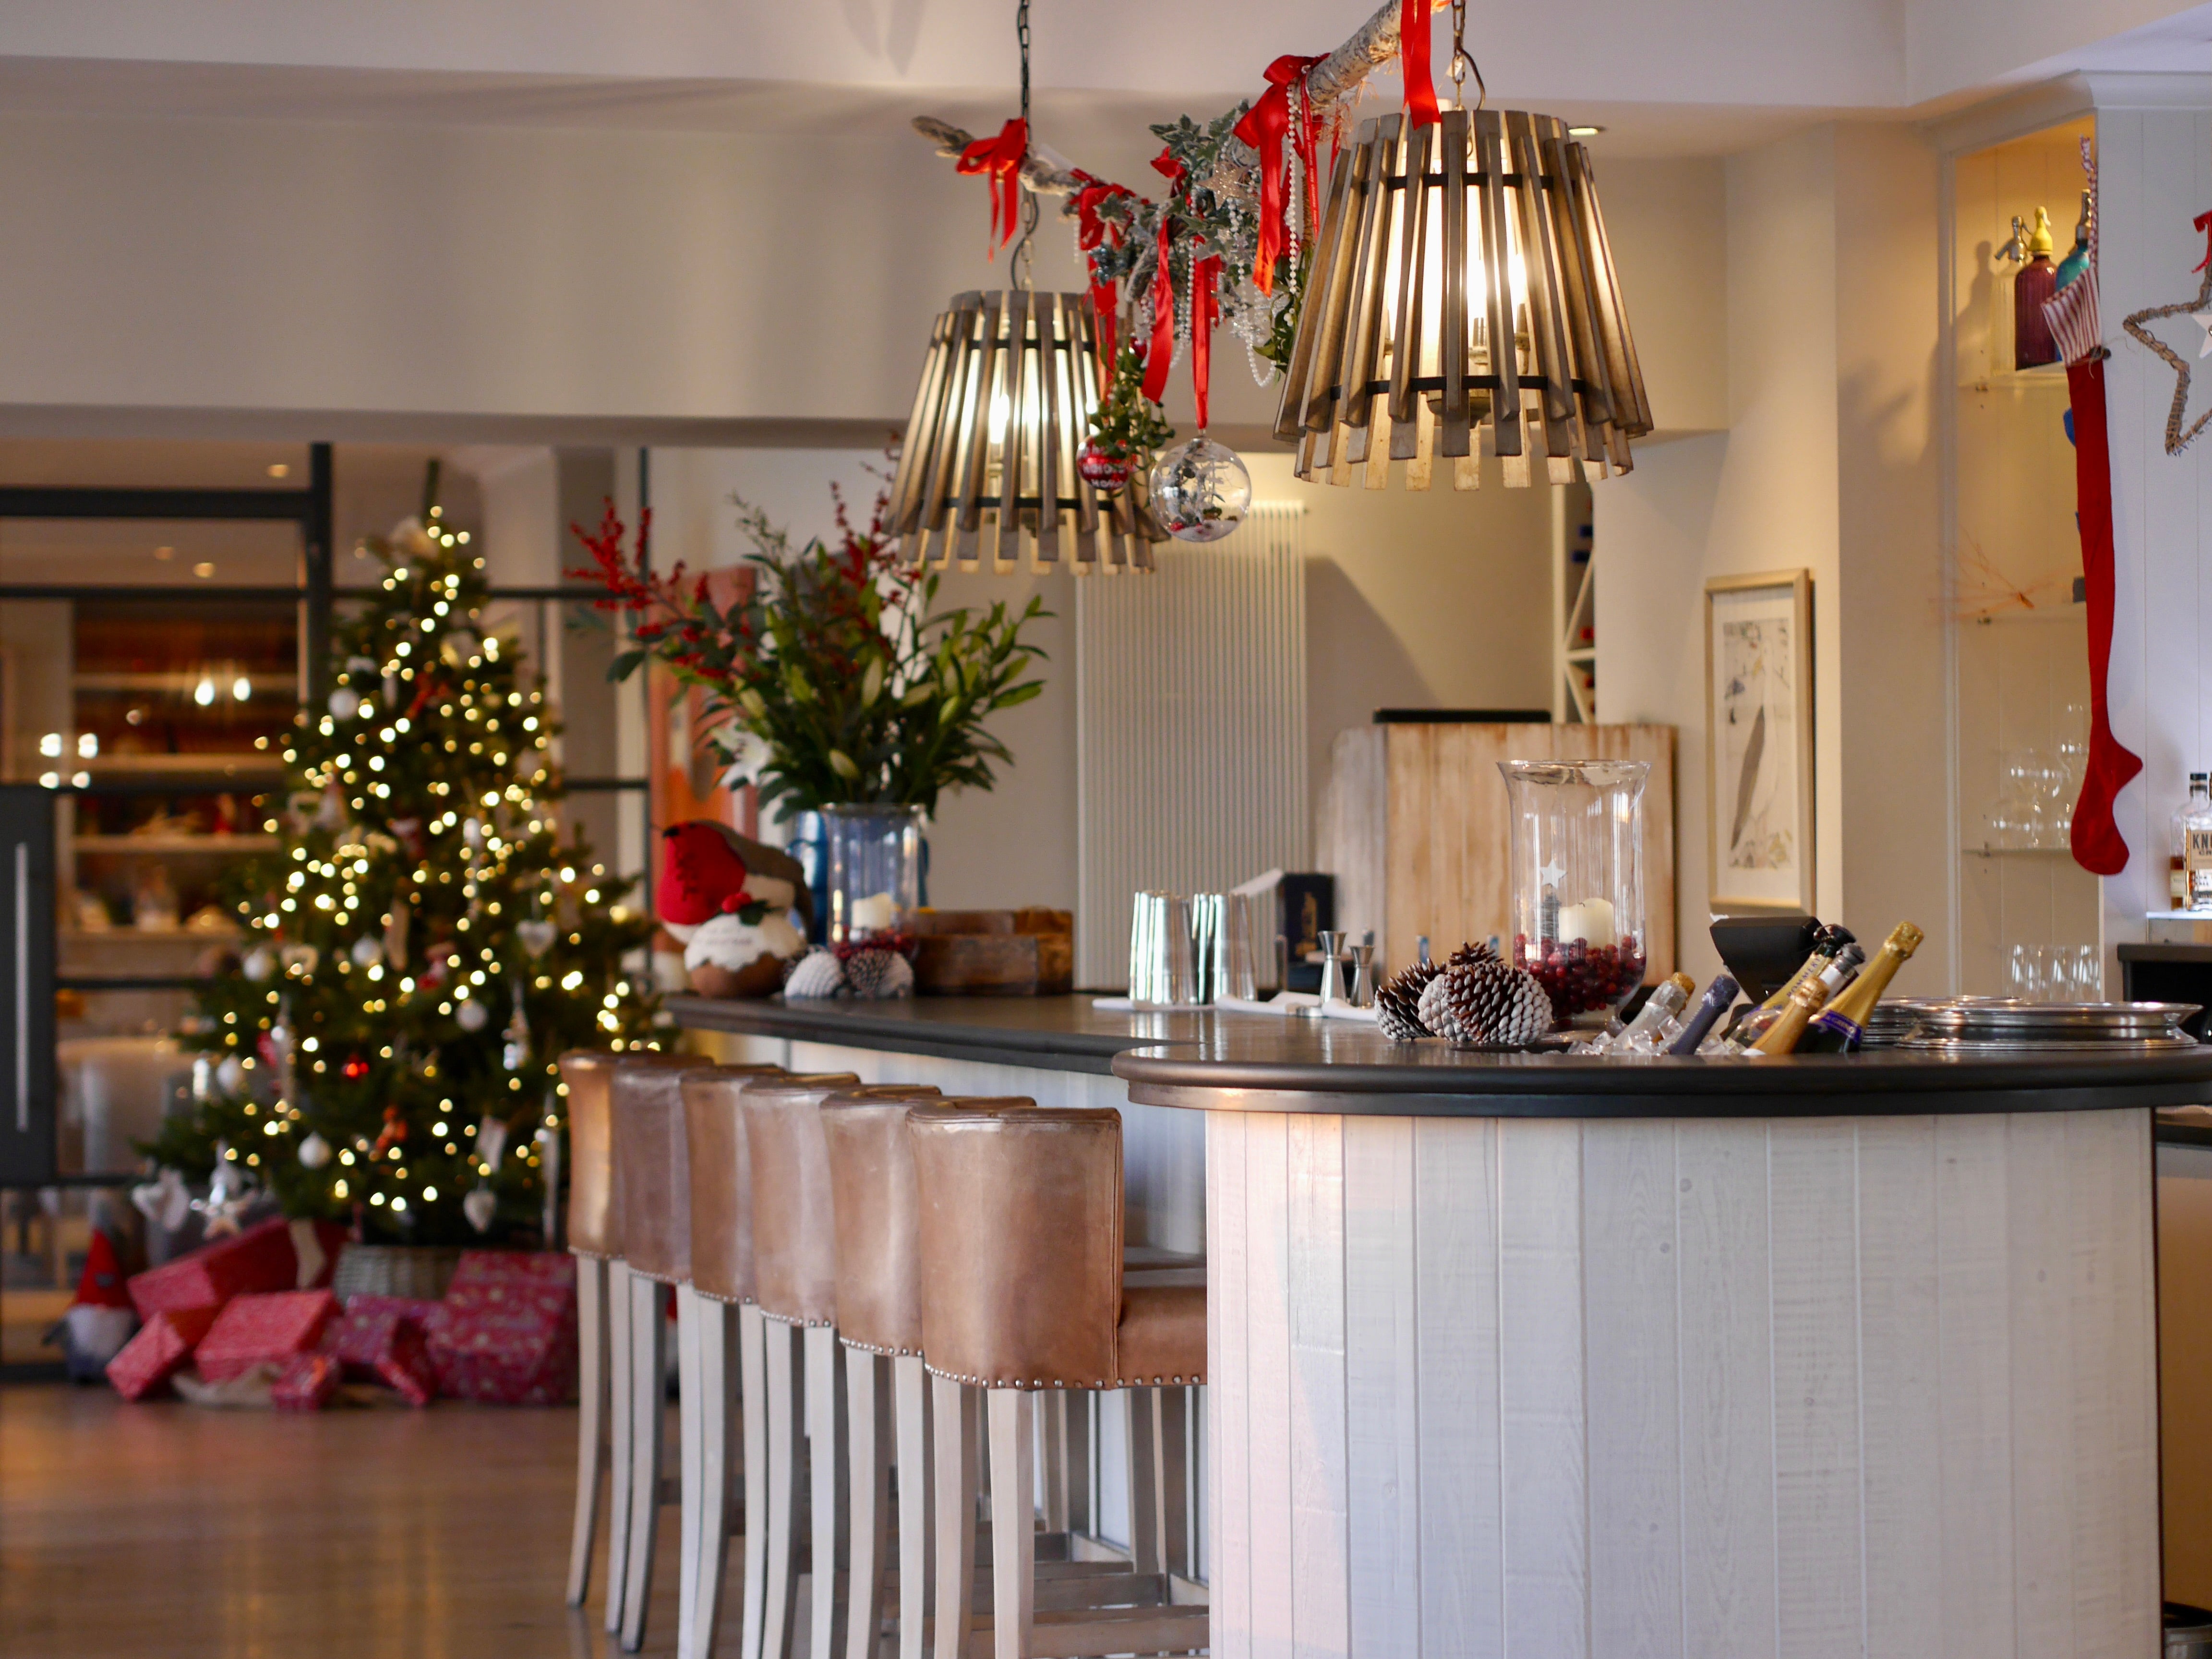 Feast on festive favourites from Christmas Eve dinner to Boxing Day brunch at The Idle